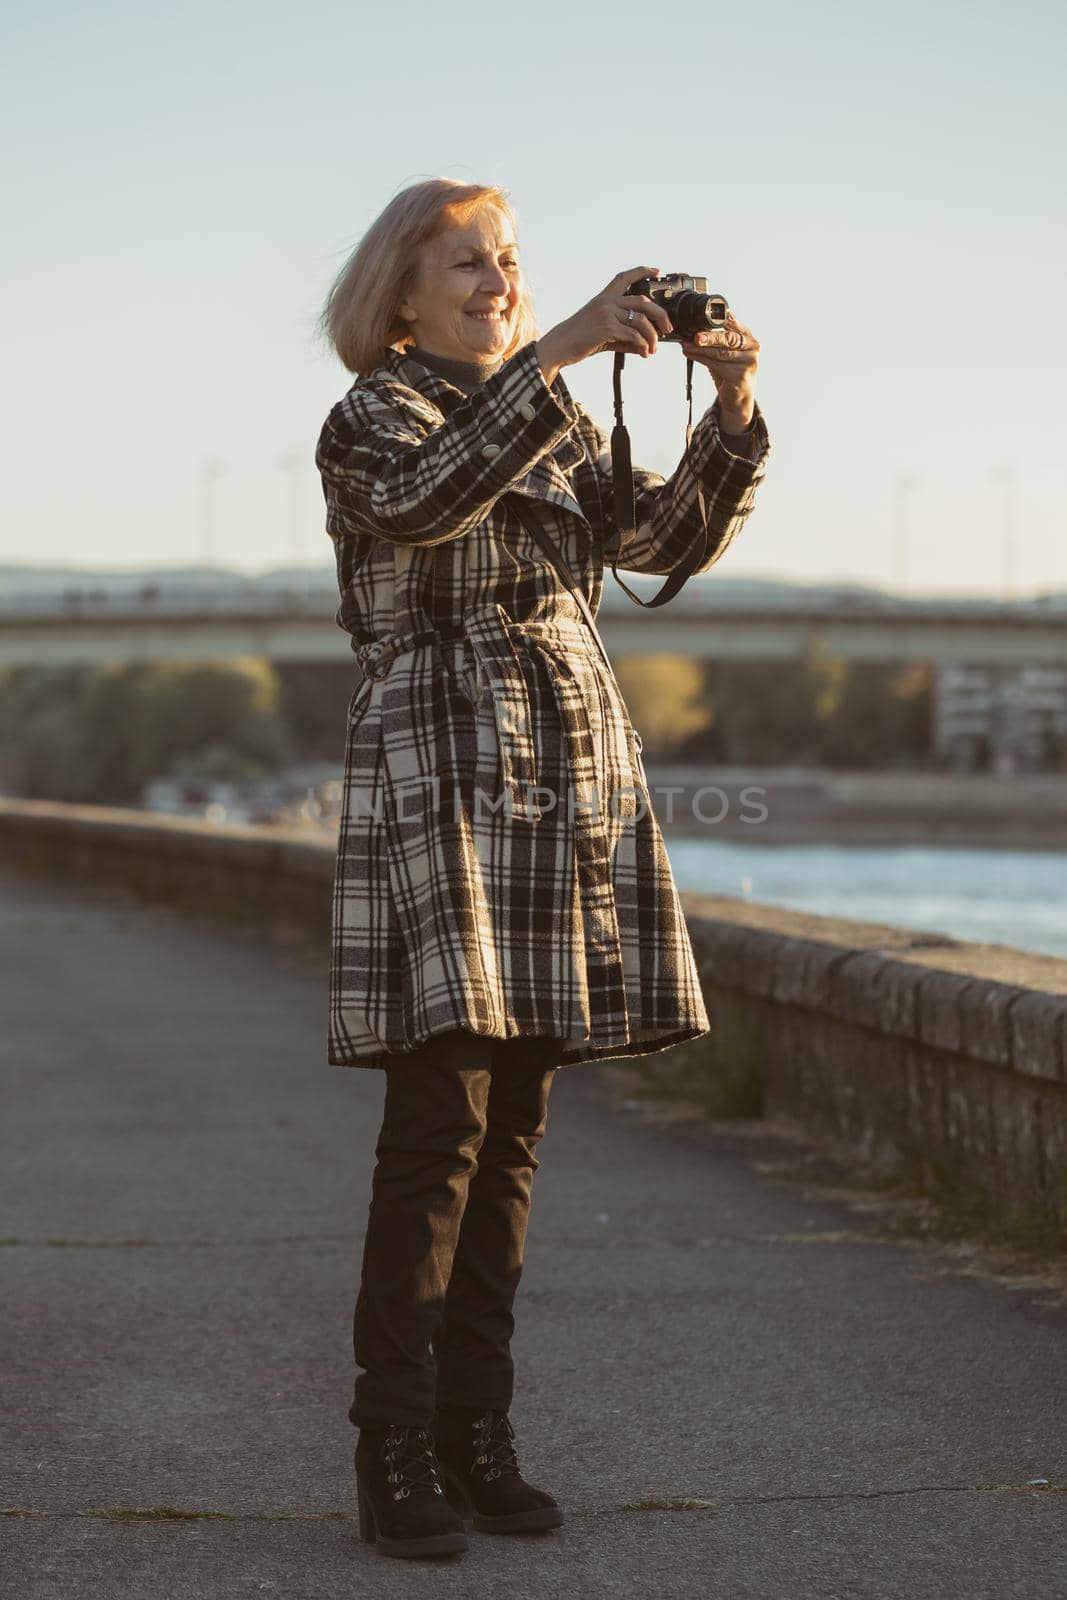 Senior woman enjoys photographing while standing by the river.